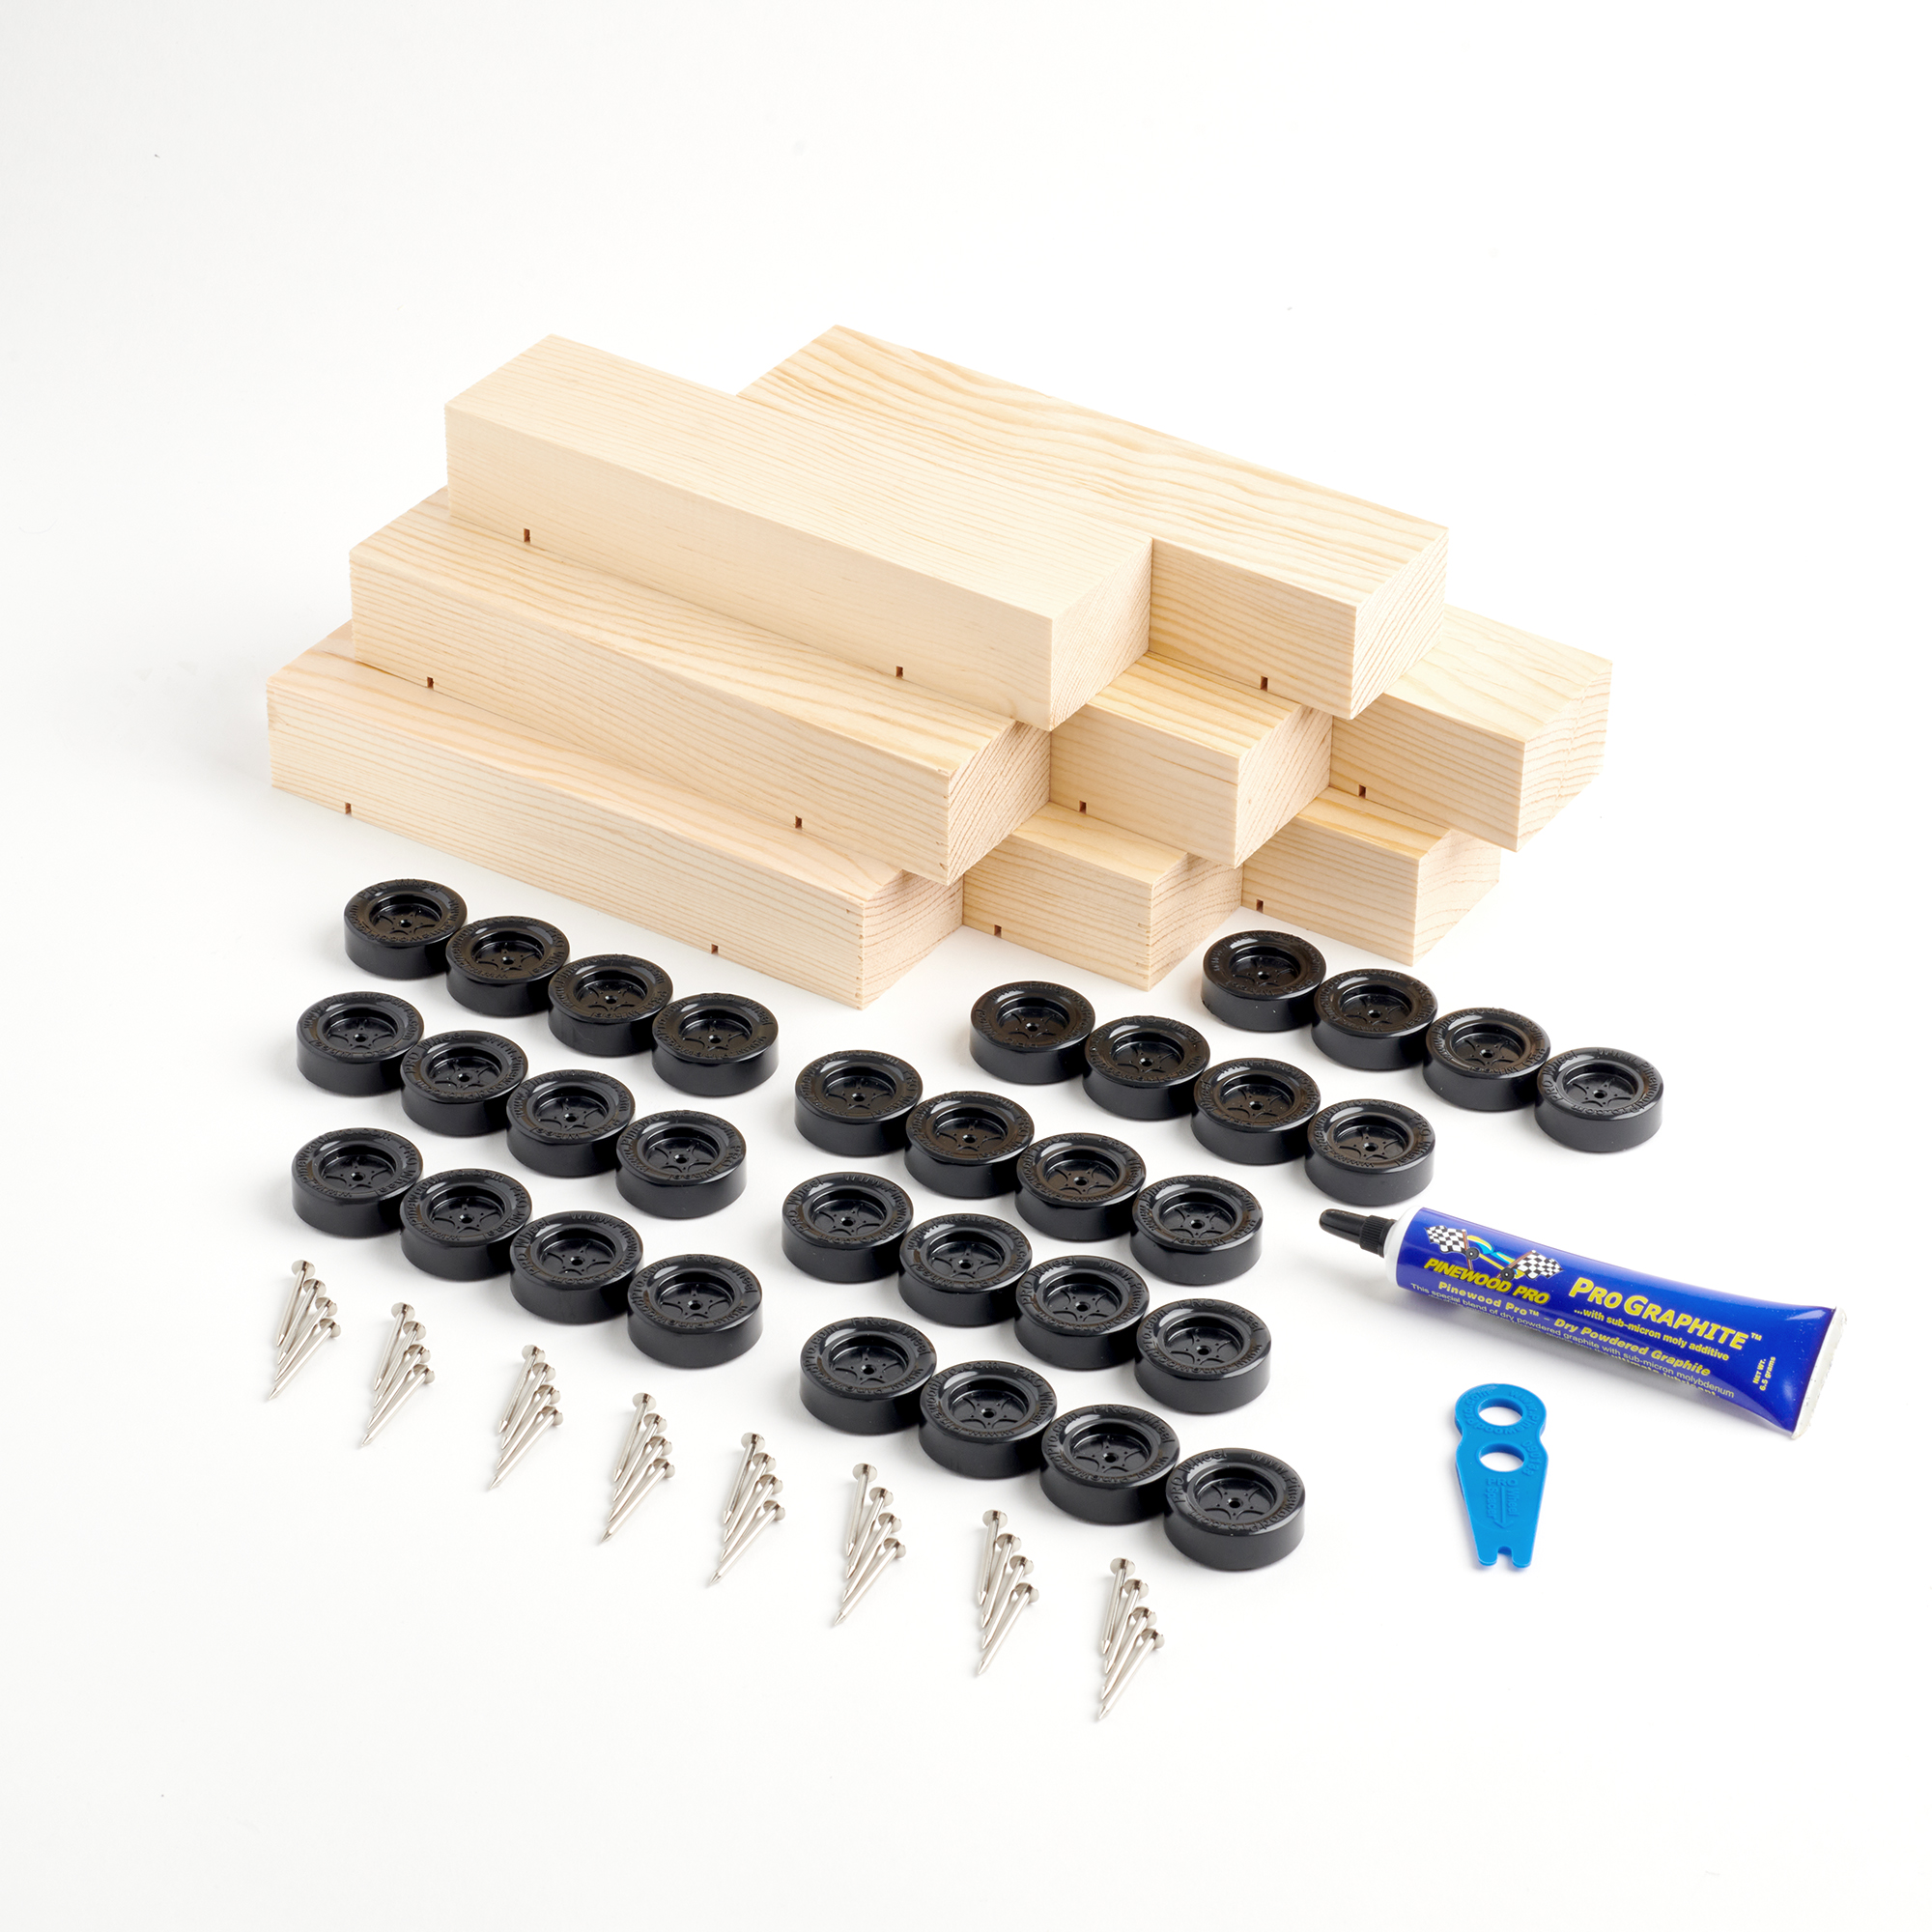 Pinewood Pro Pine Derby Complete Car Kit with PRO Graphite